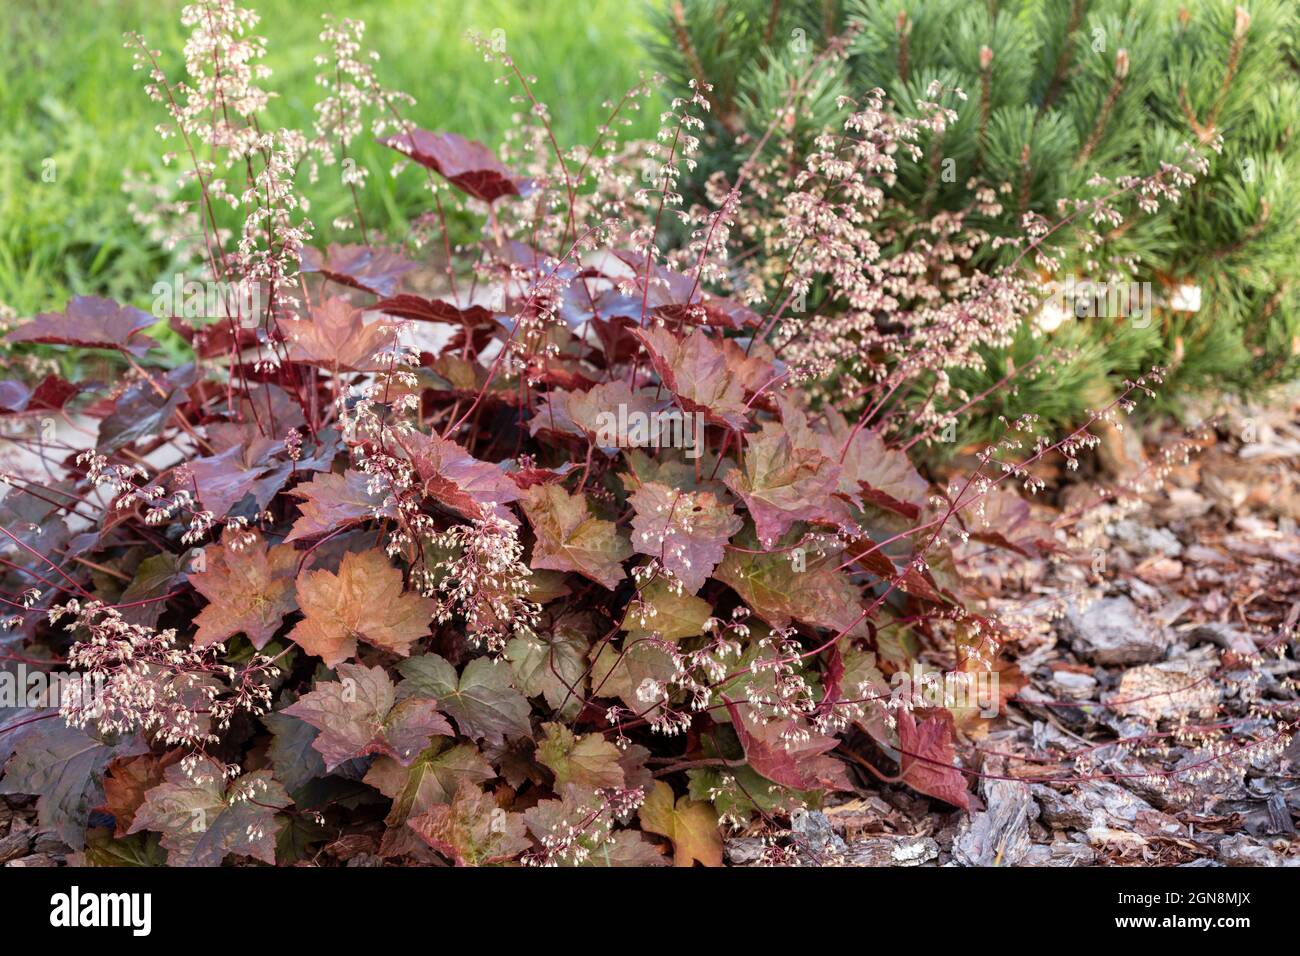 Beautiful ornamental Heuchera plant with decorative foliage and small white flowers in landscaping Stock Photo